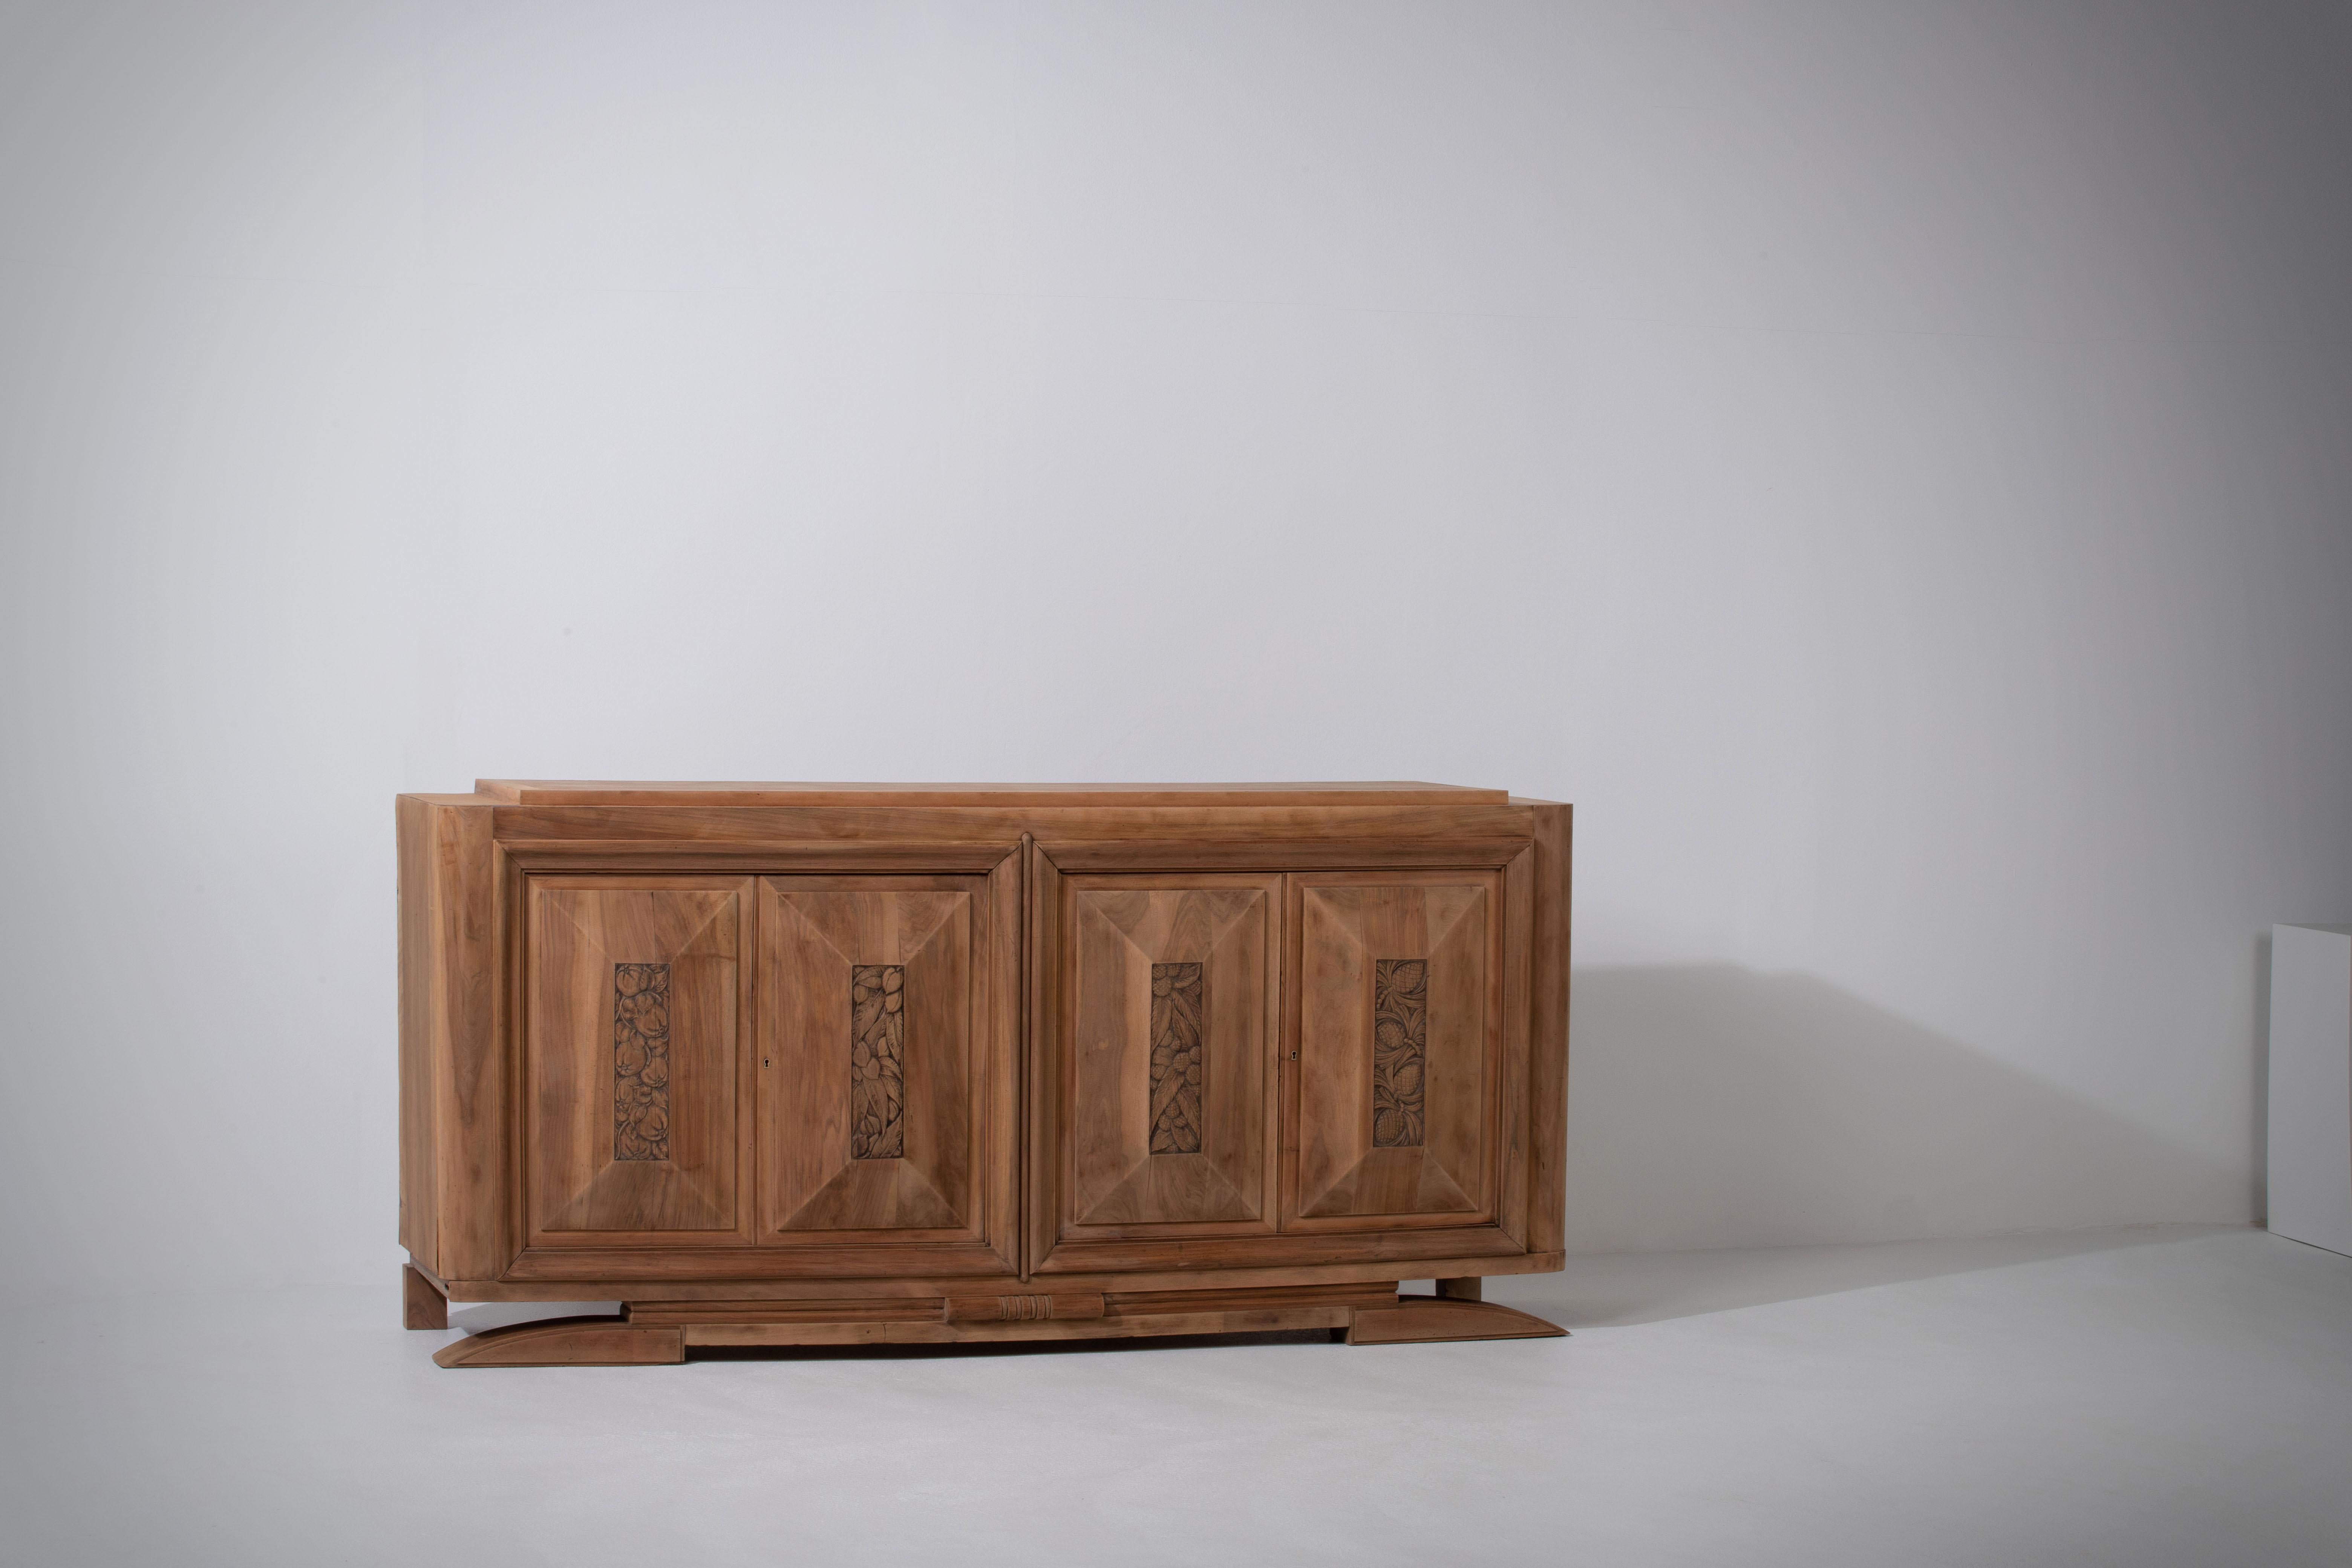 French Art Deco Oak Sideboard with Handcarved Doors, France, 1940s For Sale